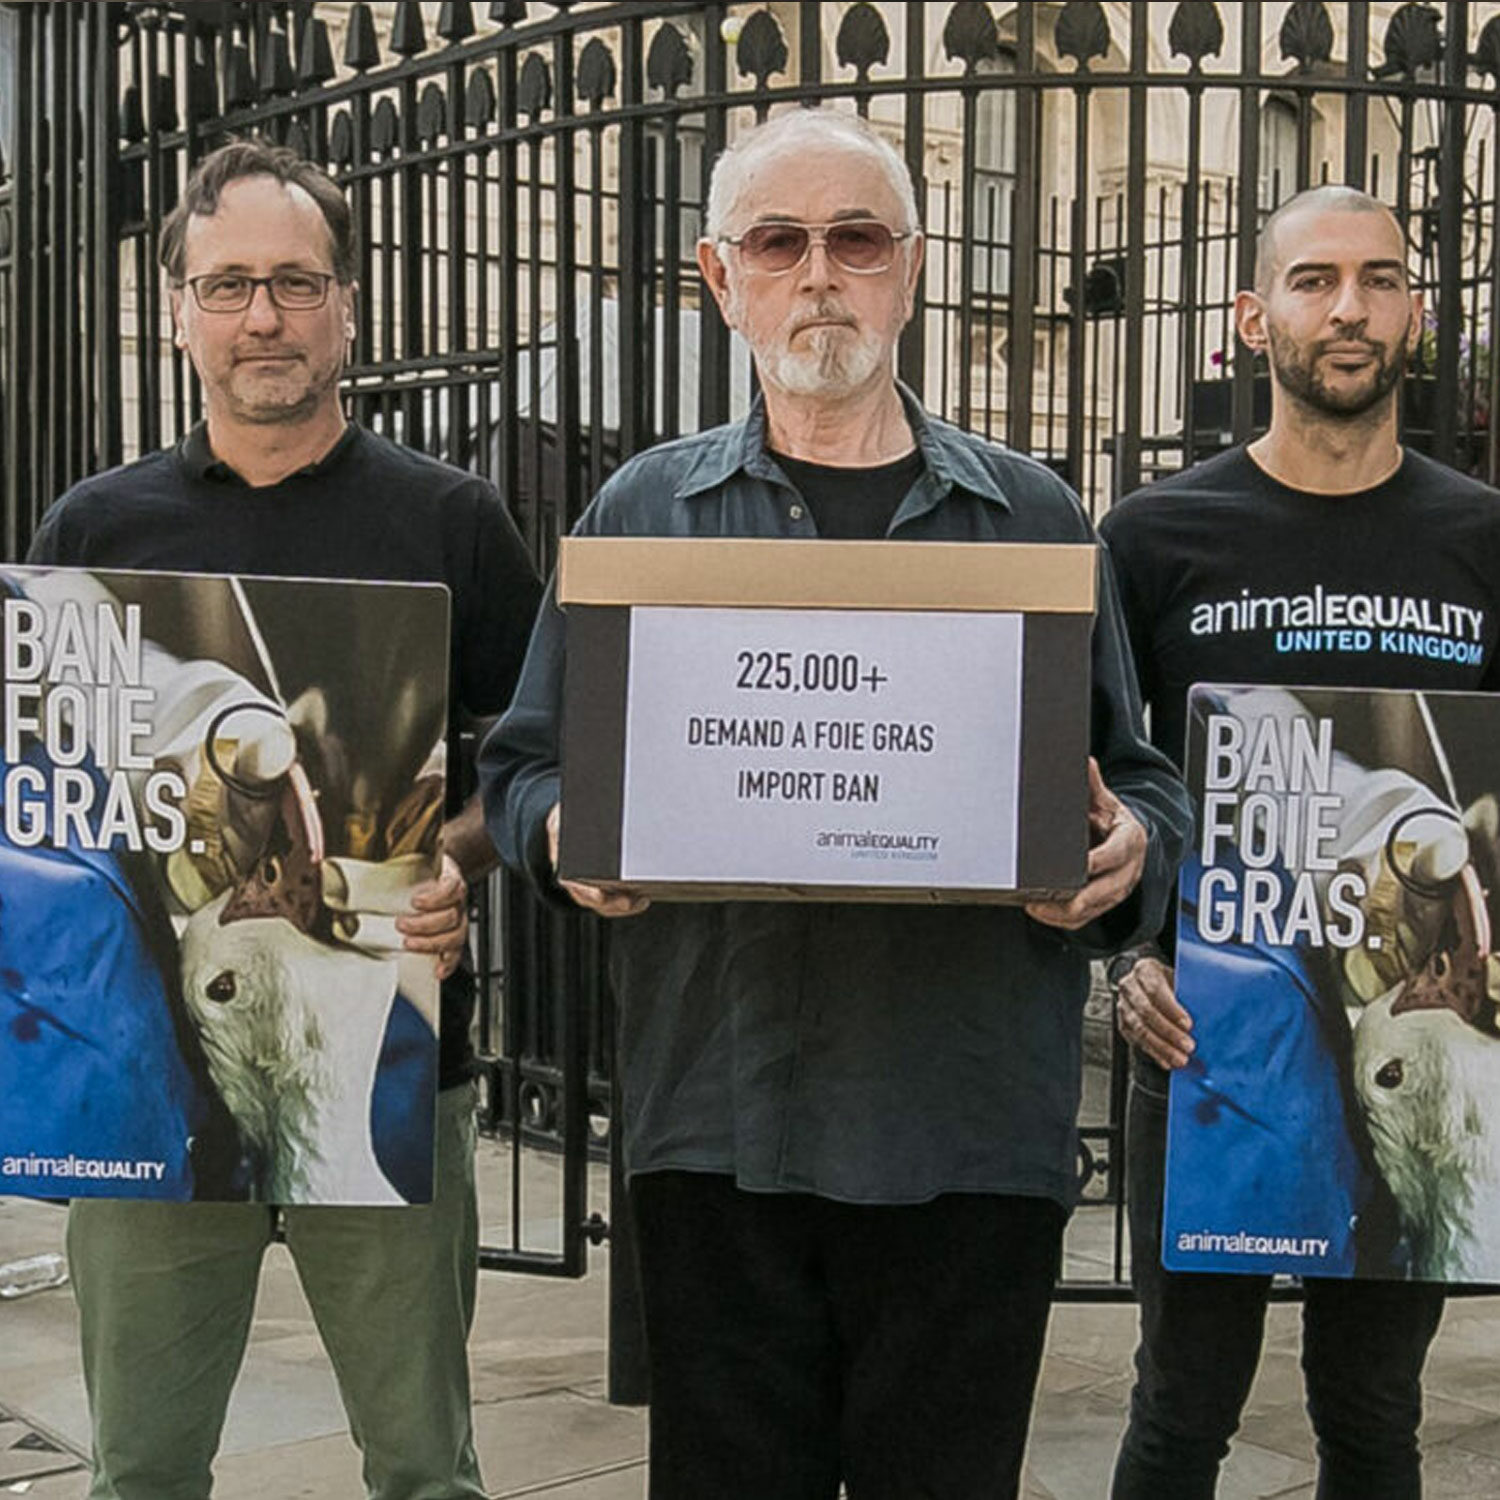 Peter Egan and Animal Equality supporters deliver 225,000 petition signatures to ban foie gras